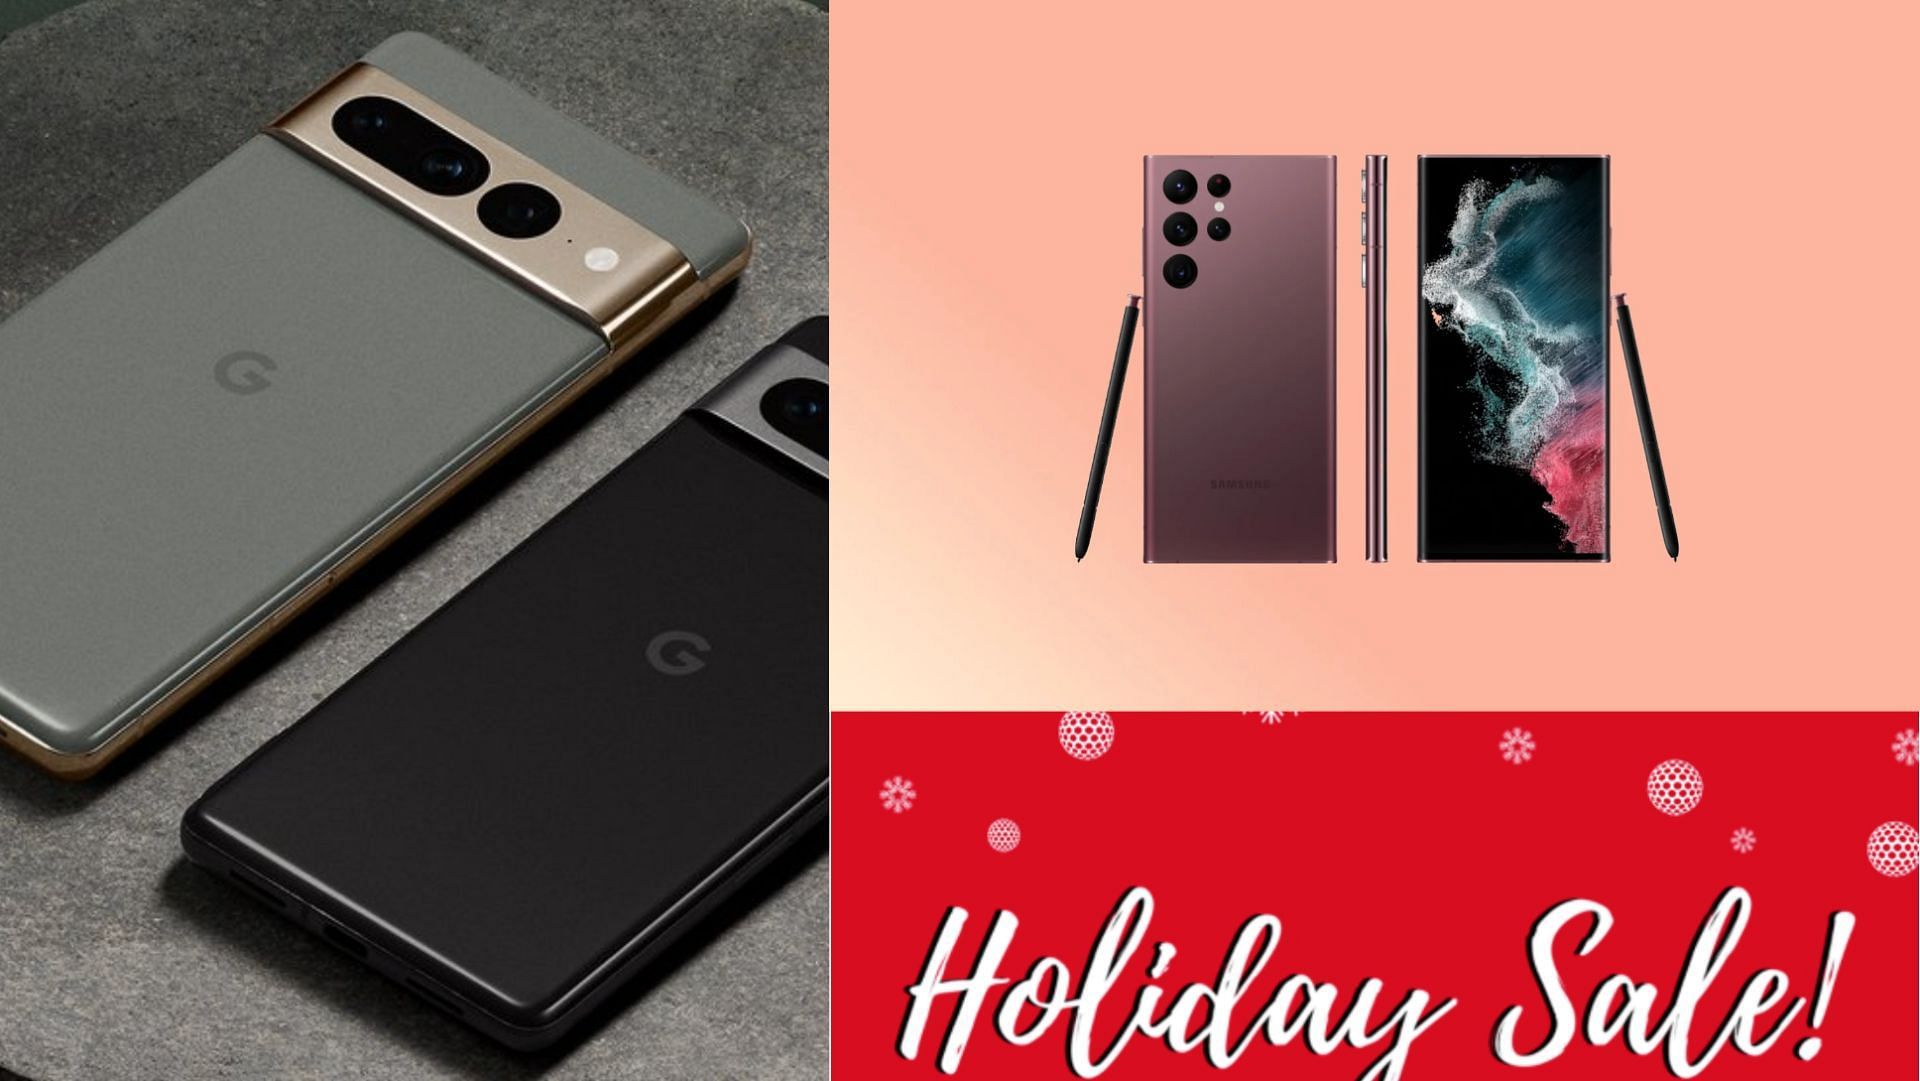 S22 Ultra or Pixel 7 Pro for Holiday Sale (Image by Google and Samsung)